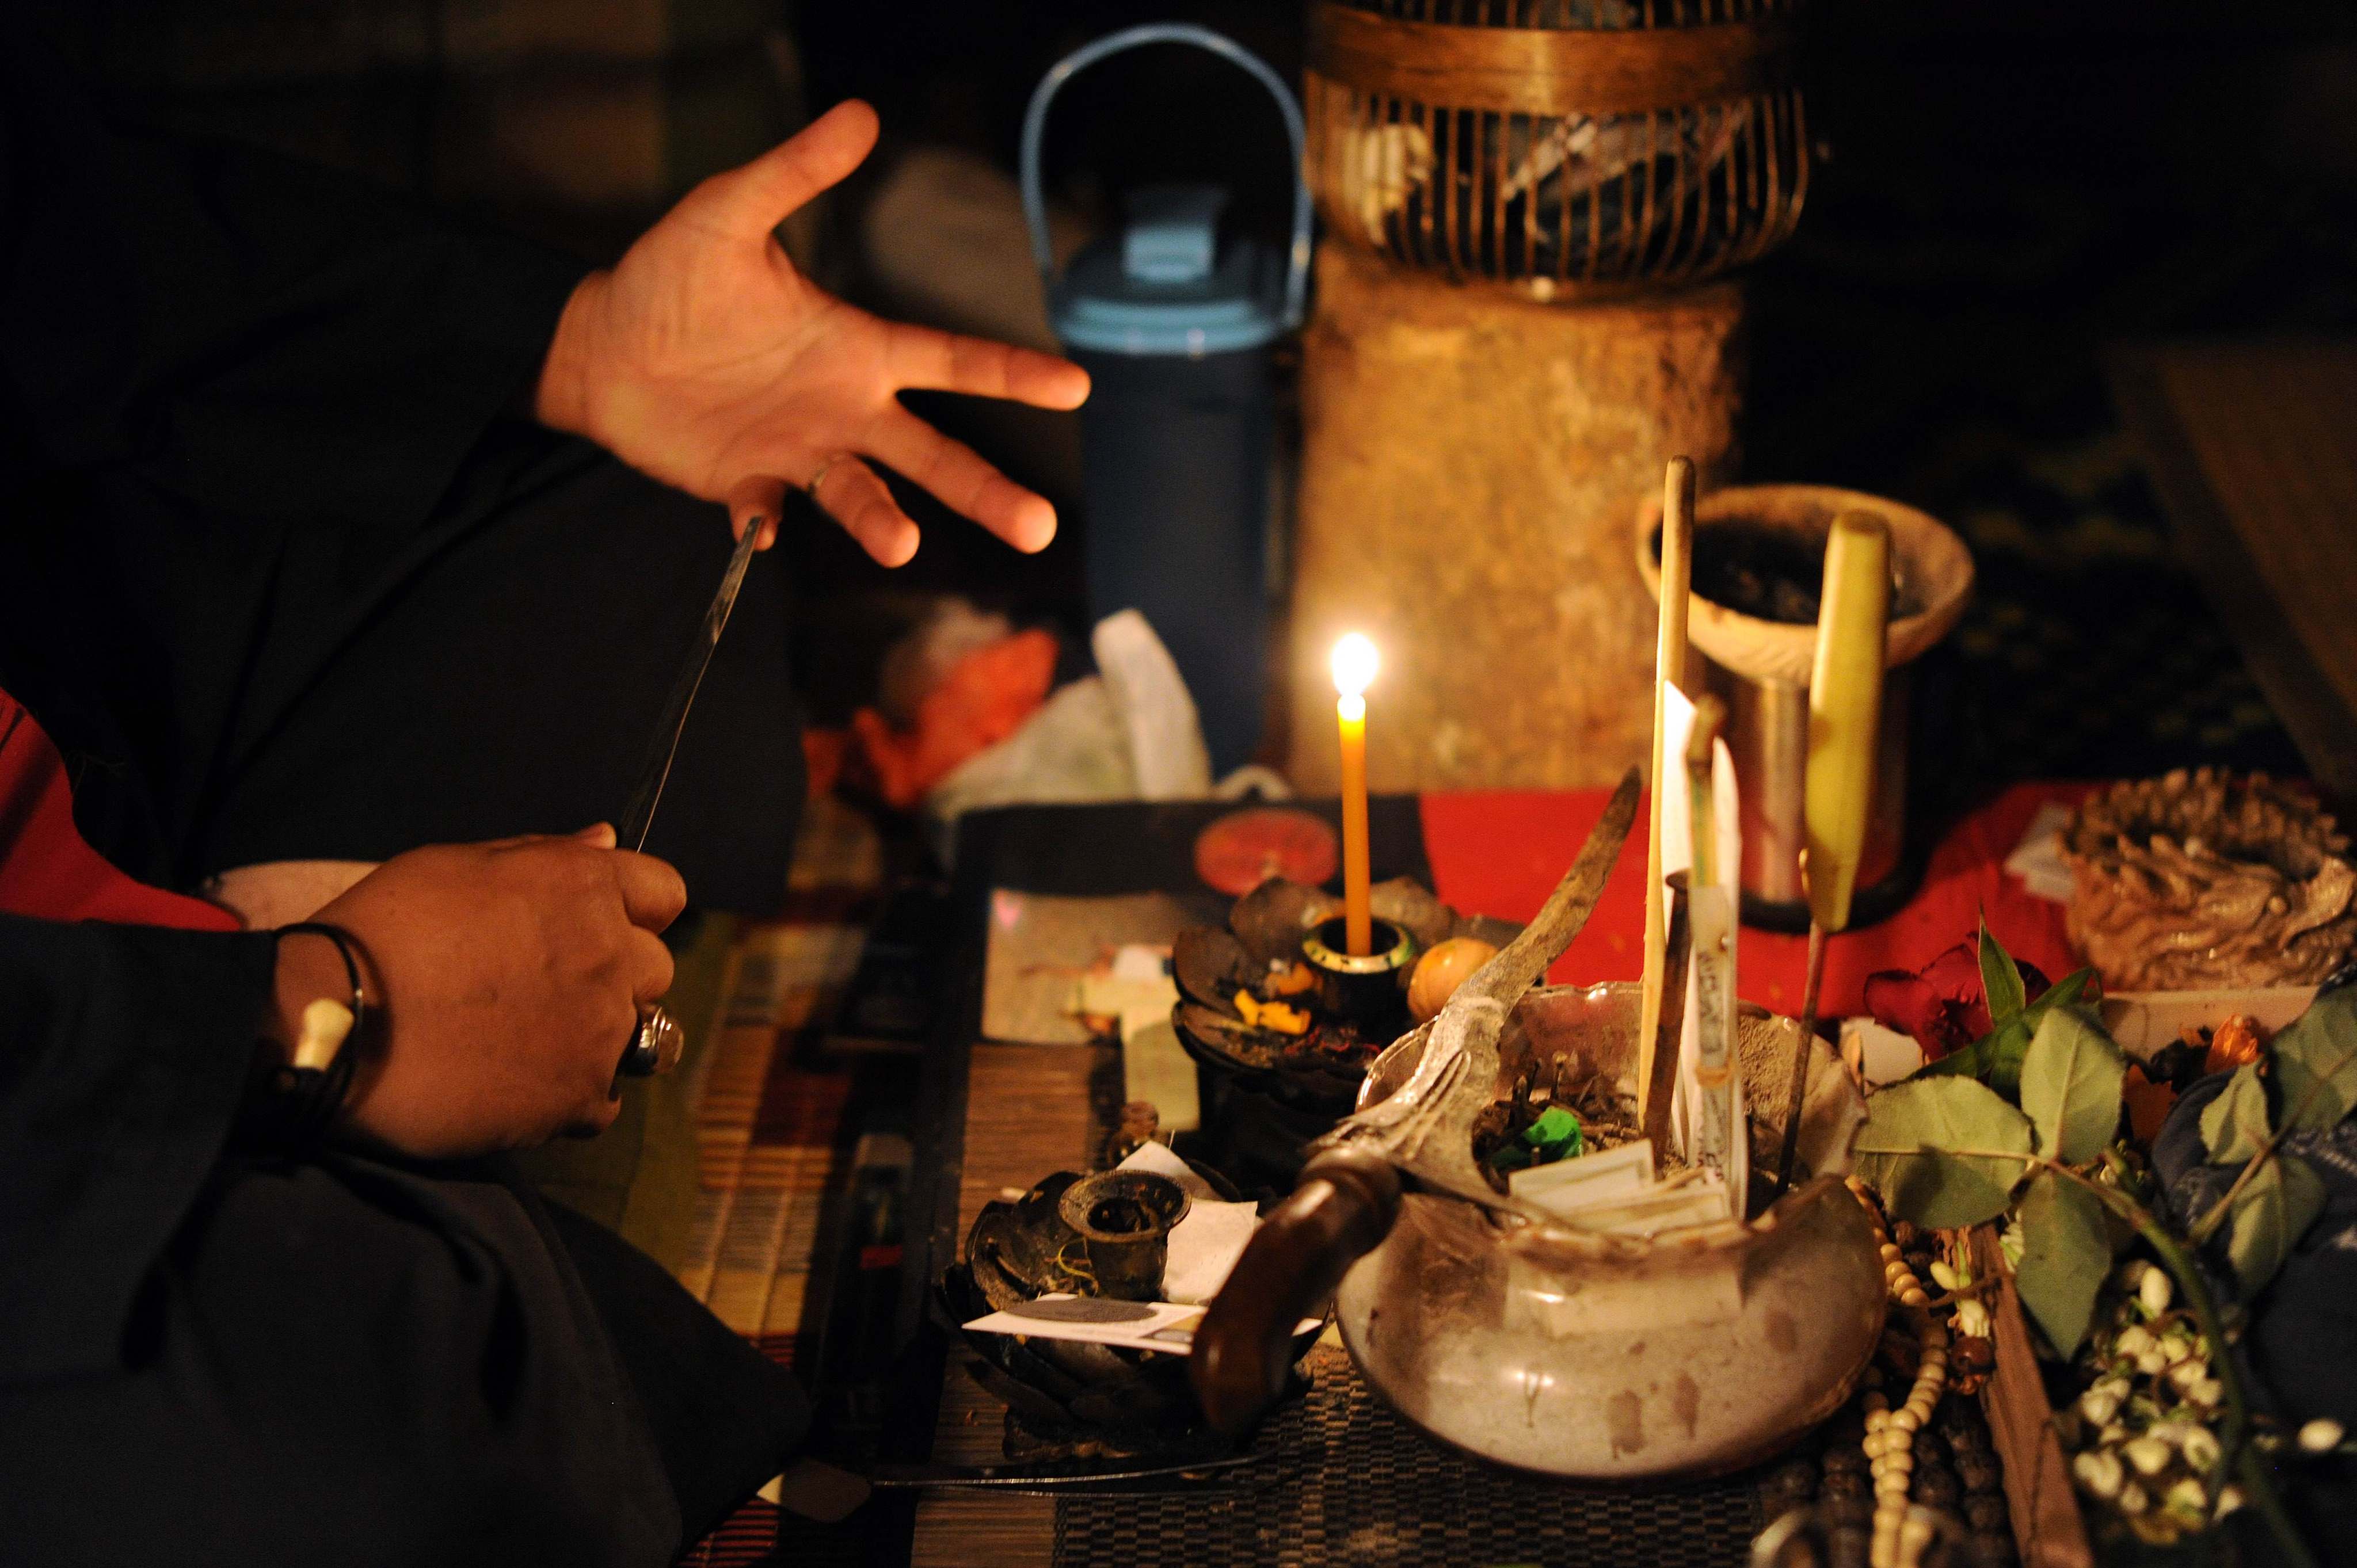 A self-professed witch doctor shows off his paraphernalia in Malaysia. Victims of “black magic” scams often claim they have been put into a trance by the scammers. Photo: AFP